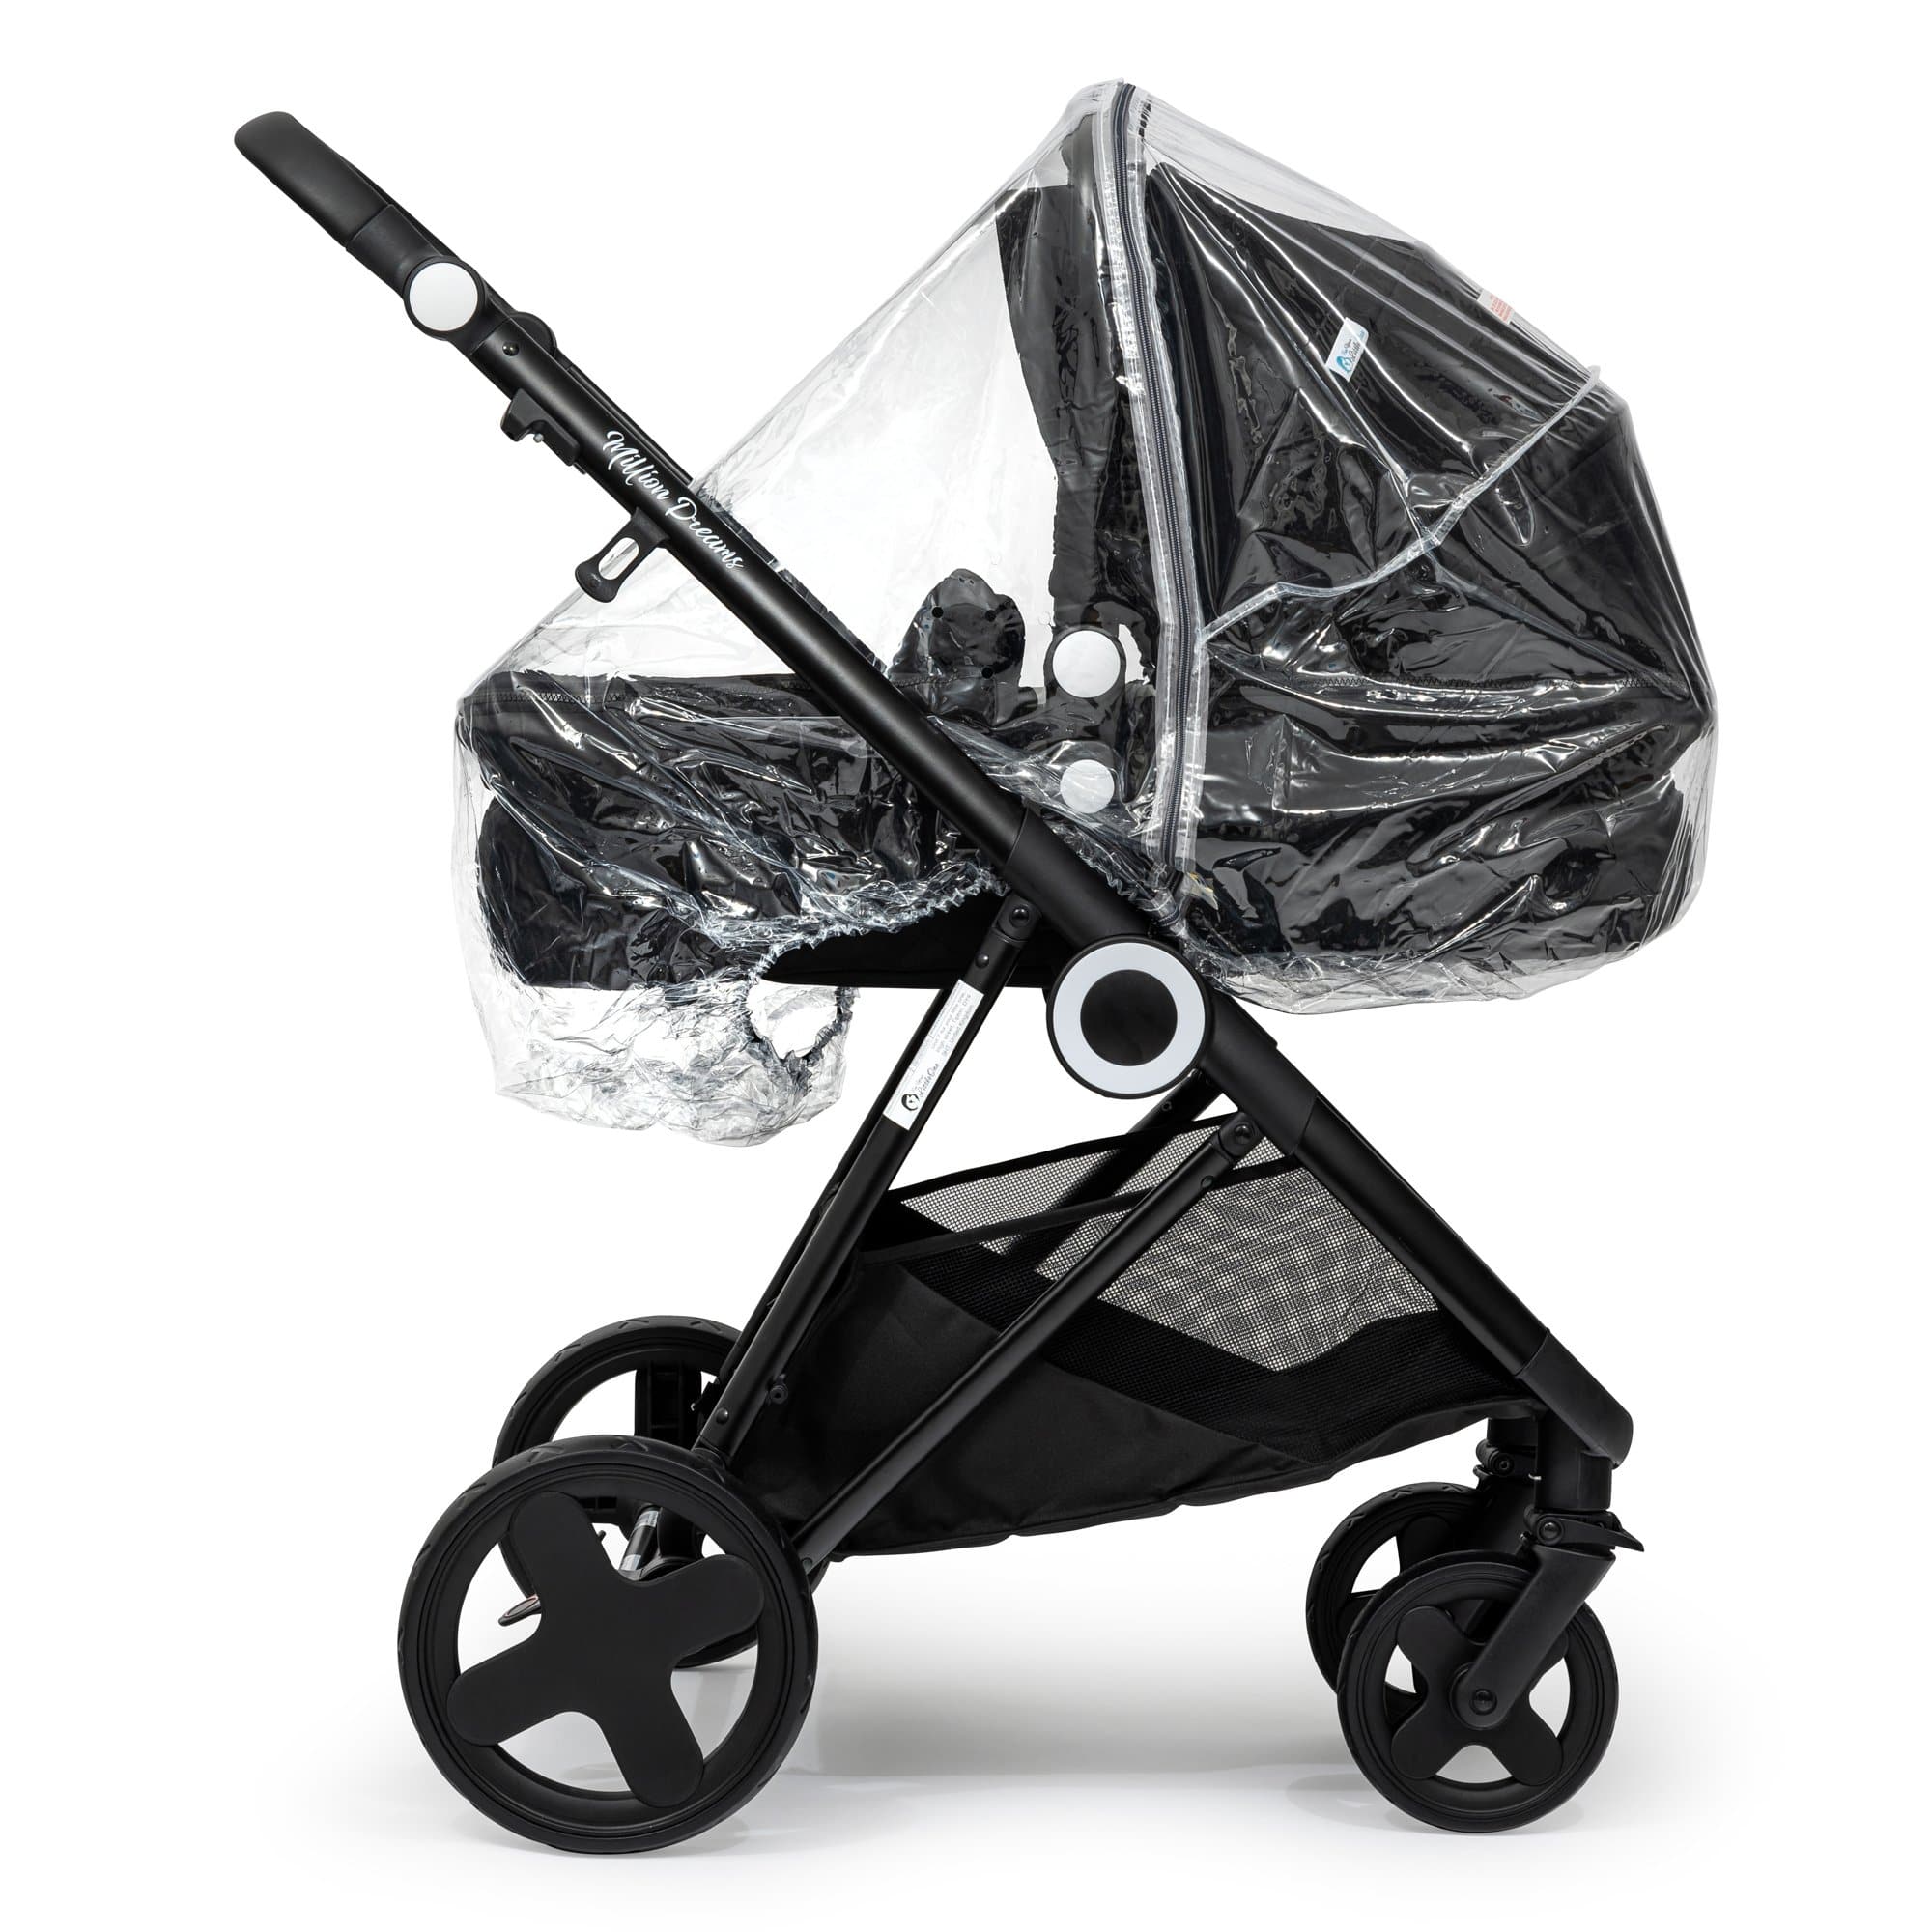 Universal Rain Cover For 2 in 1 Prams - Fits All Models